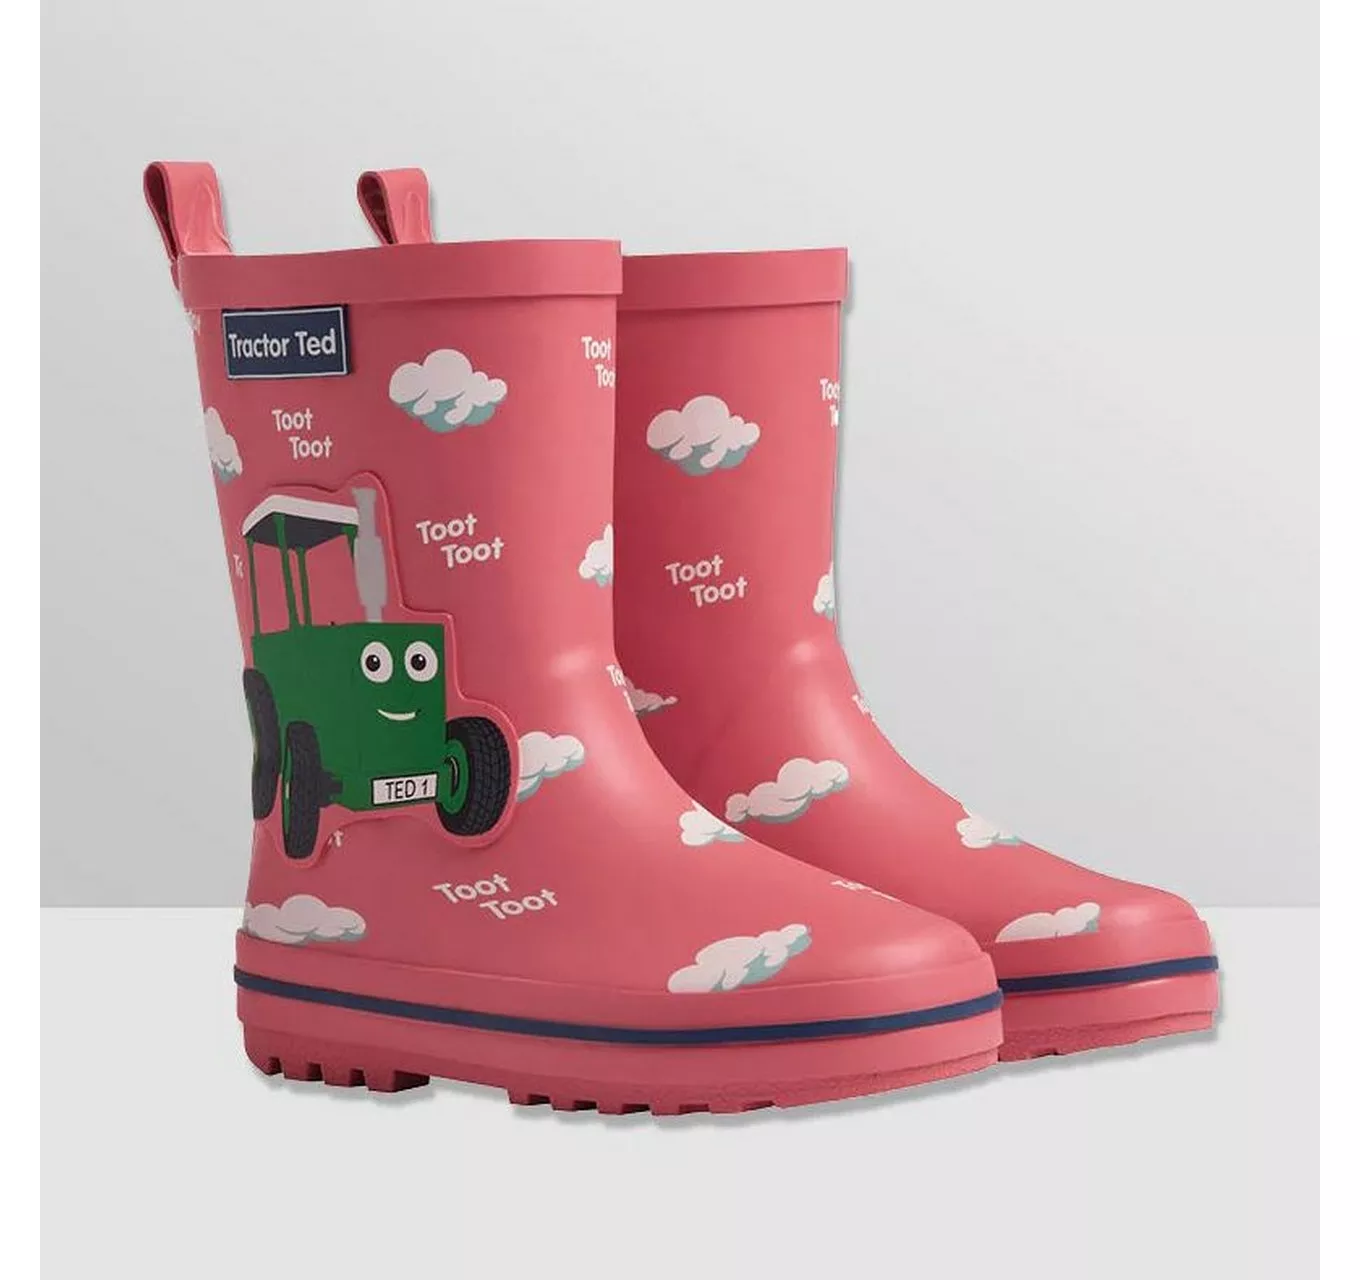 Tractor Ted Toot! Wellies 10